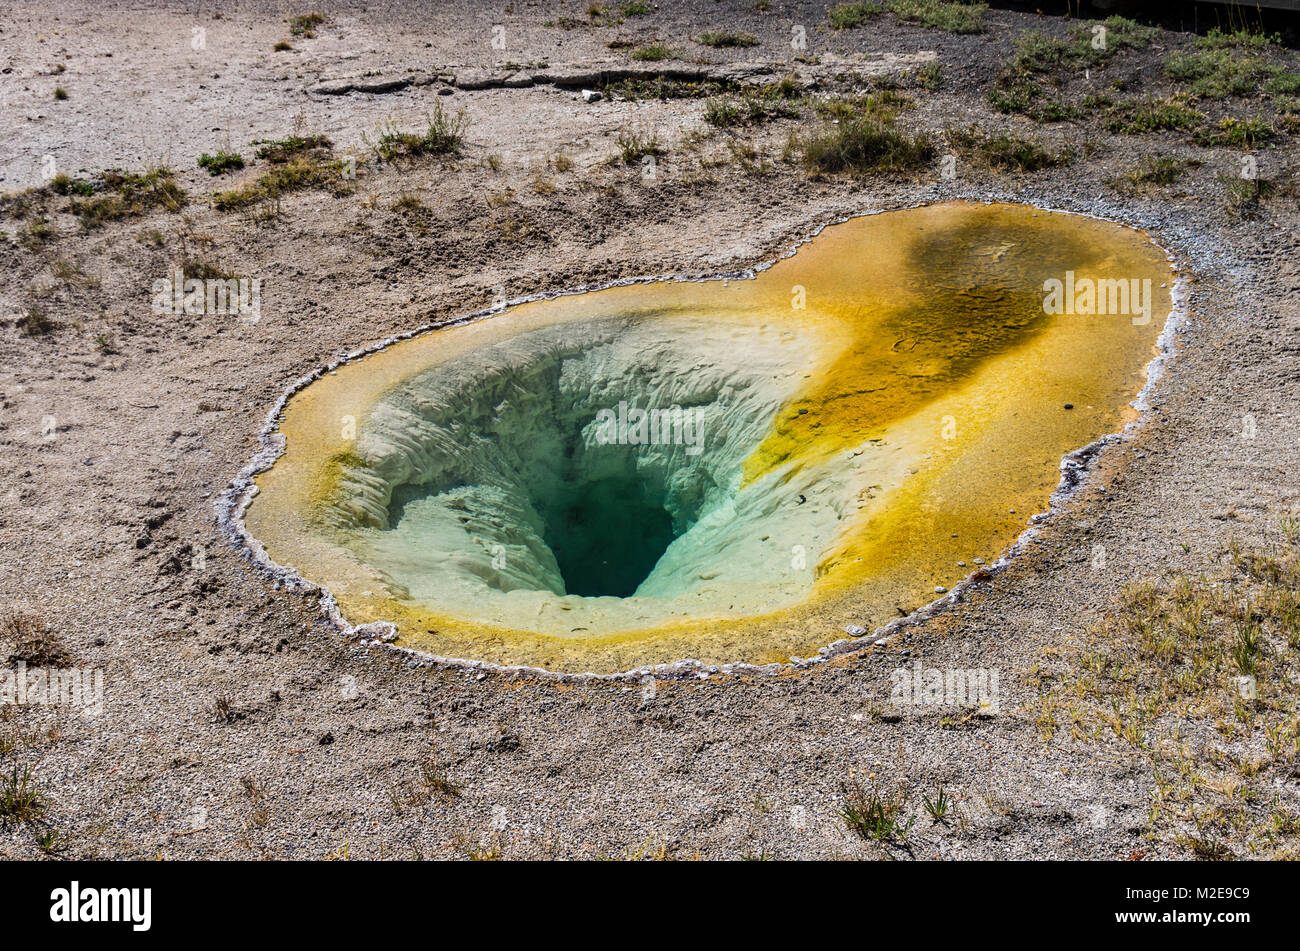 Delicate Belgian Pool and hot spring in the Upper Geyser Basin.  Yellowstone National Park, Wyoming, USA Stock Photo